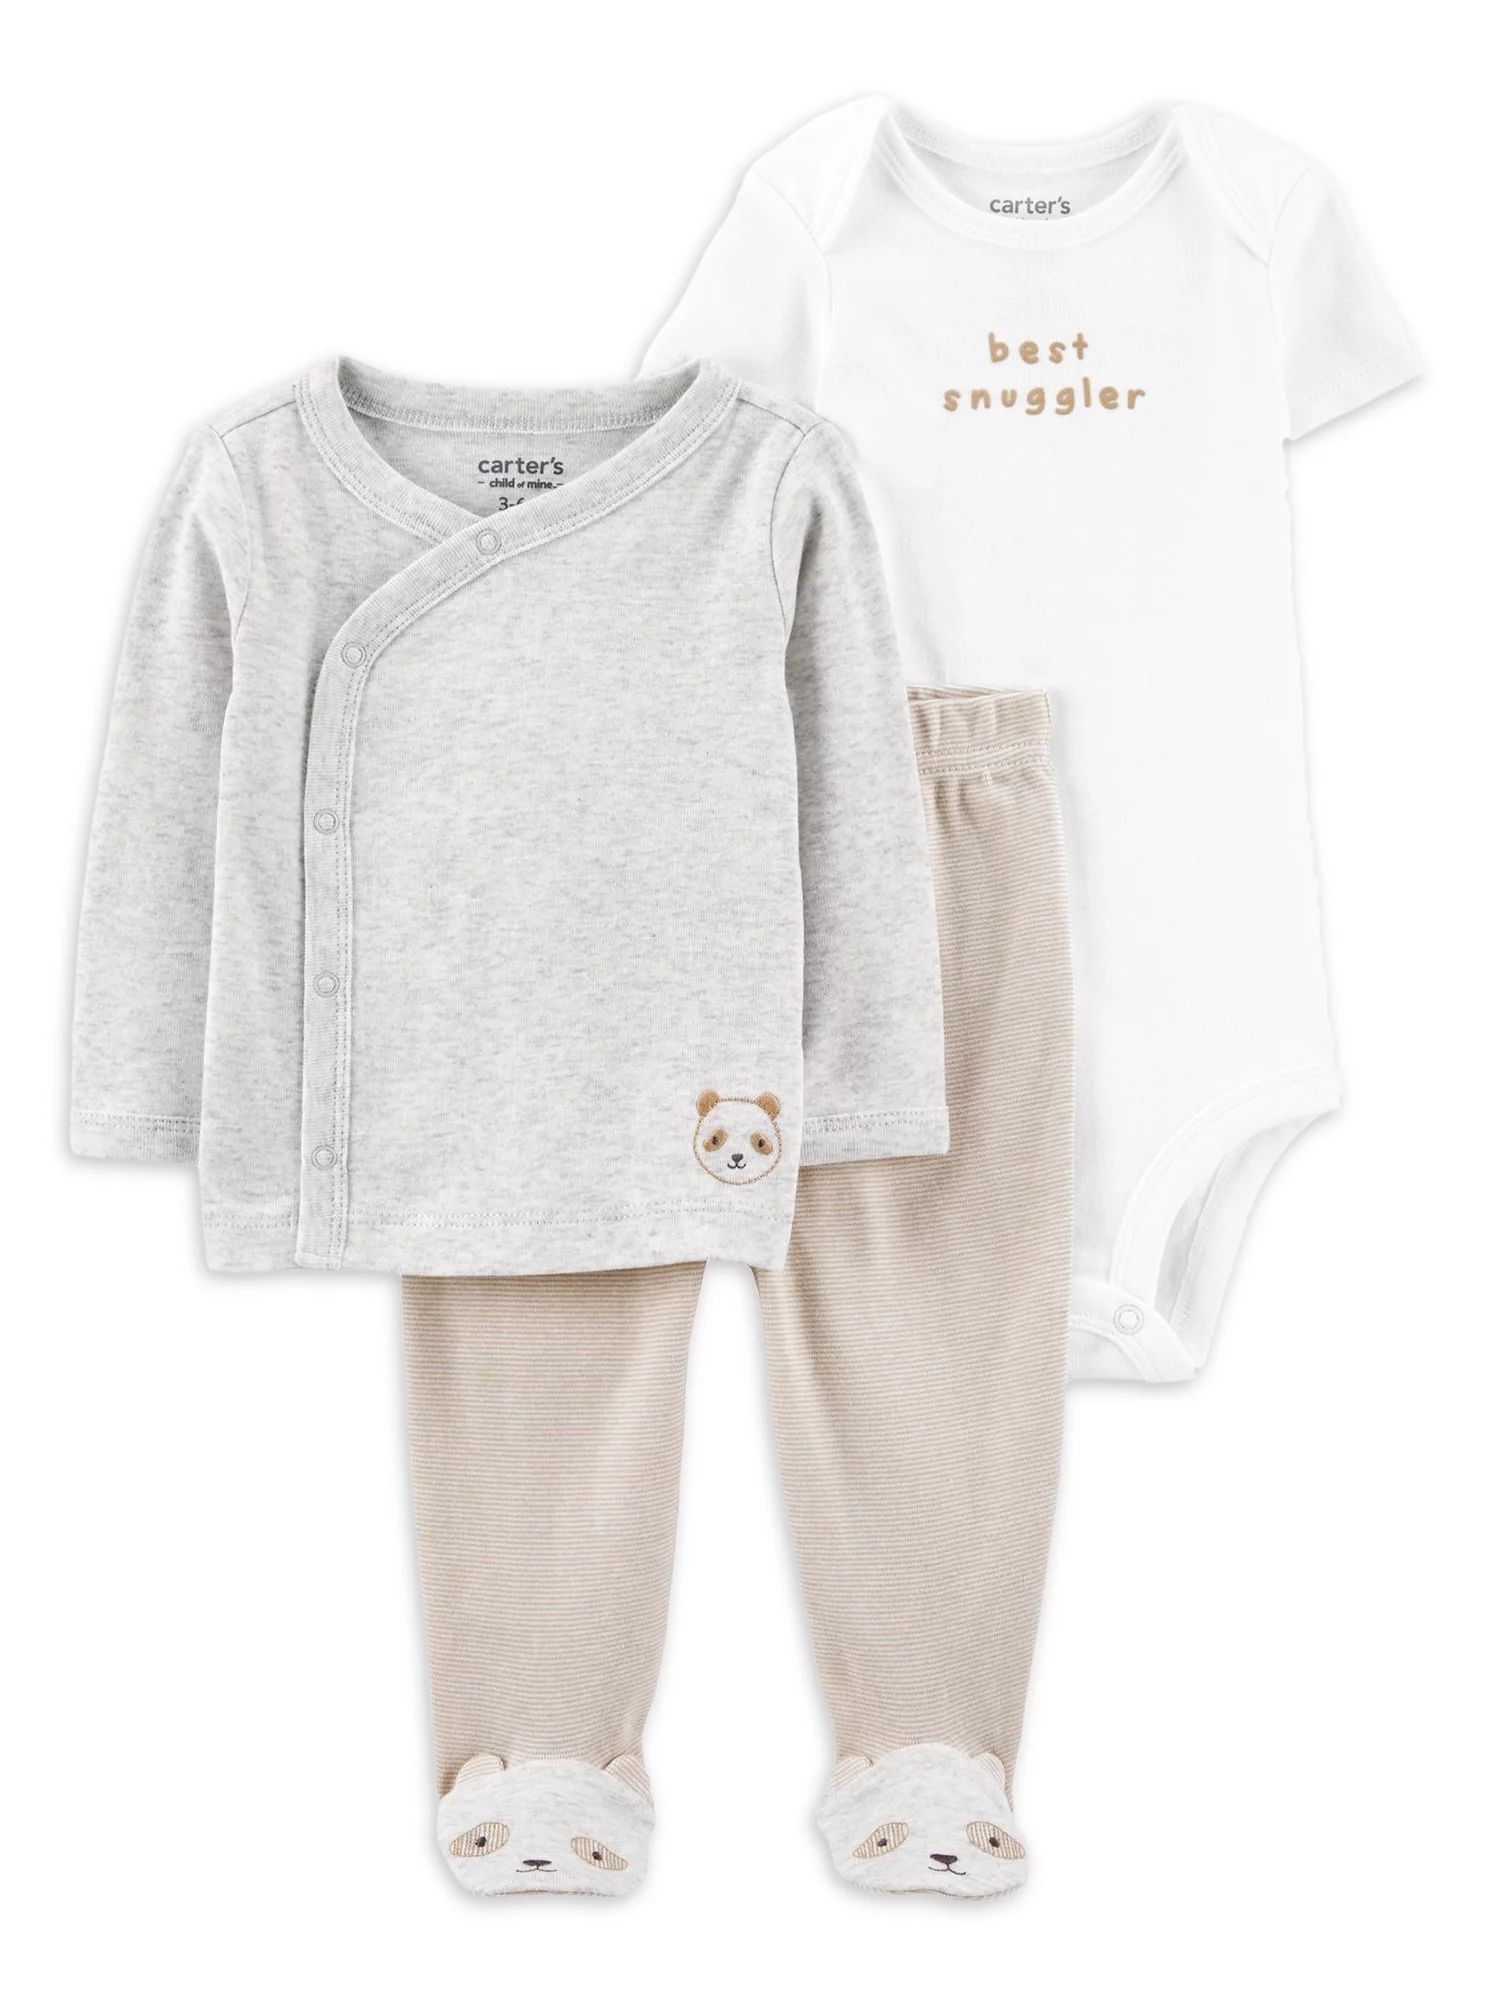 Carter's Child of Mine Unisex Footed Outfit Set, 3-Piece, Sizes Preemie-9M | Walmart (US)